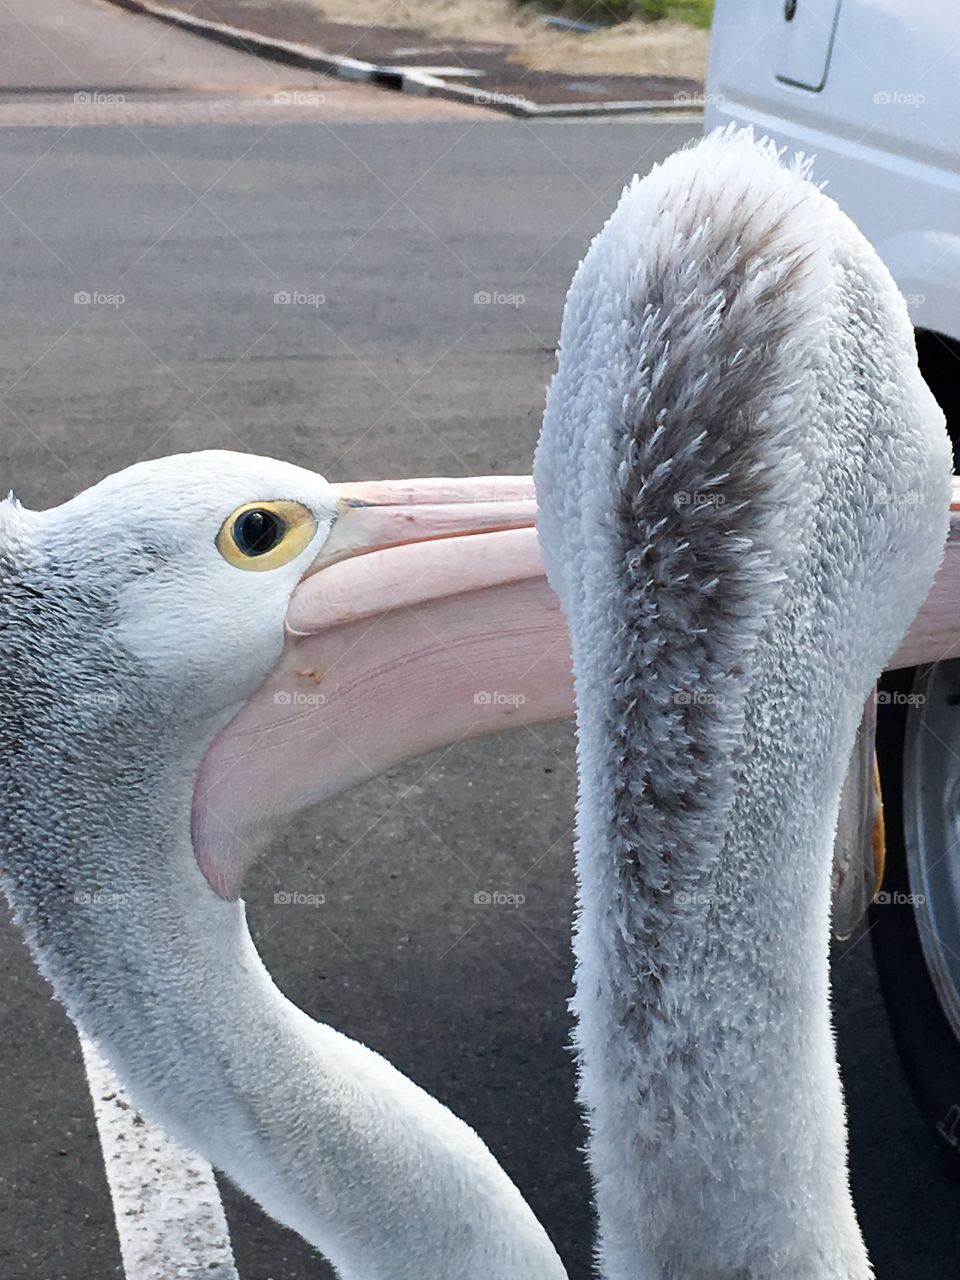 Waiting for the dole. Two hungry Pelicans begging for food in car park parking lot head shots 